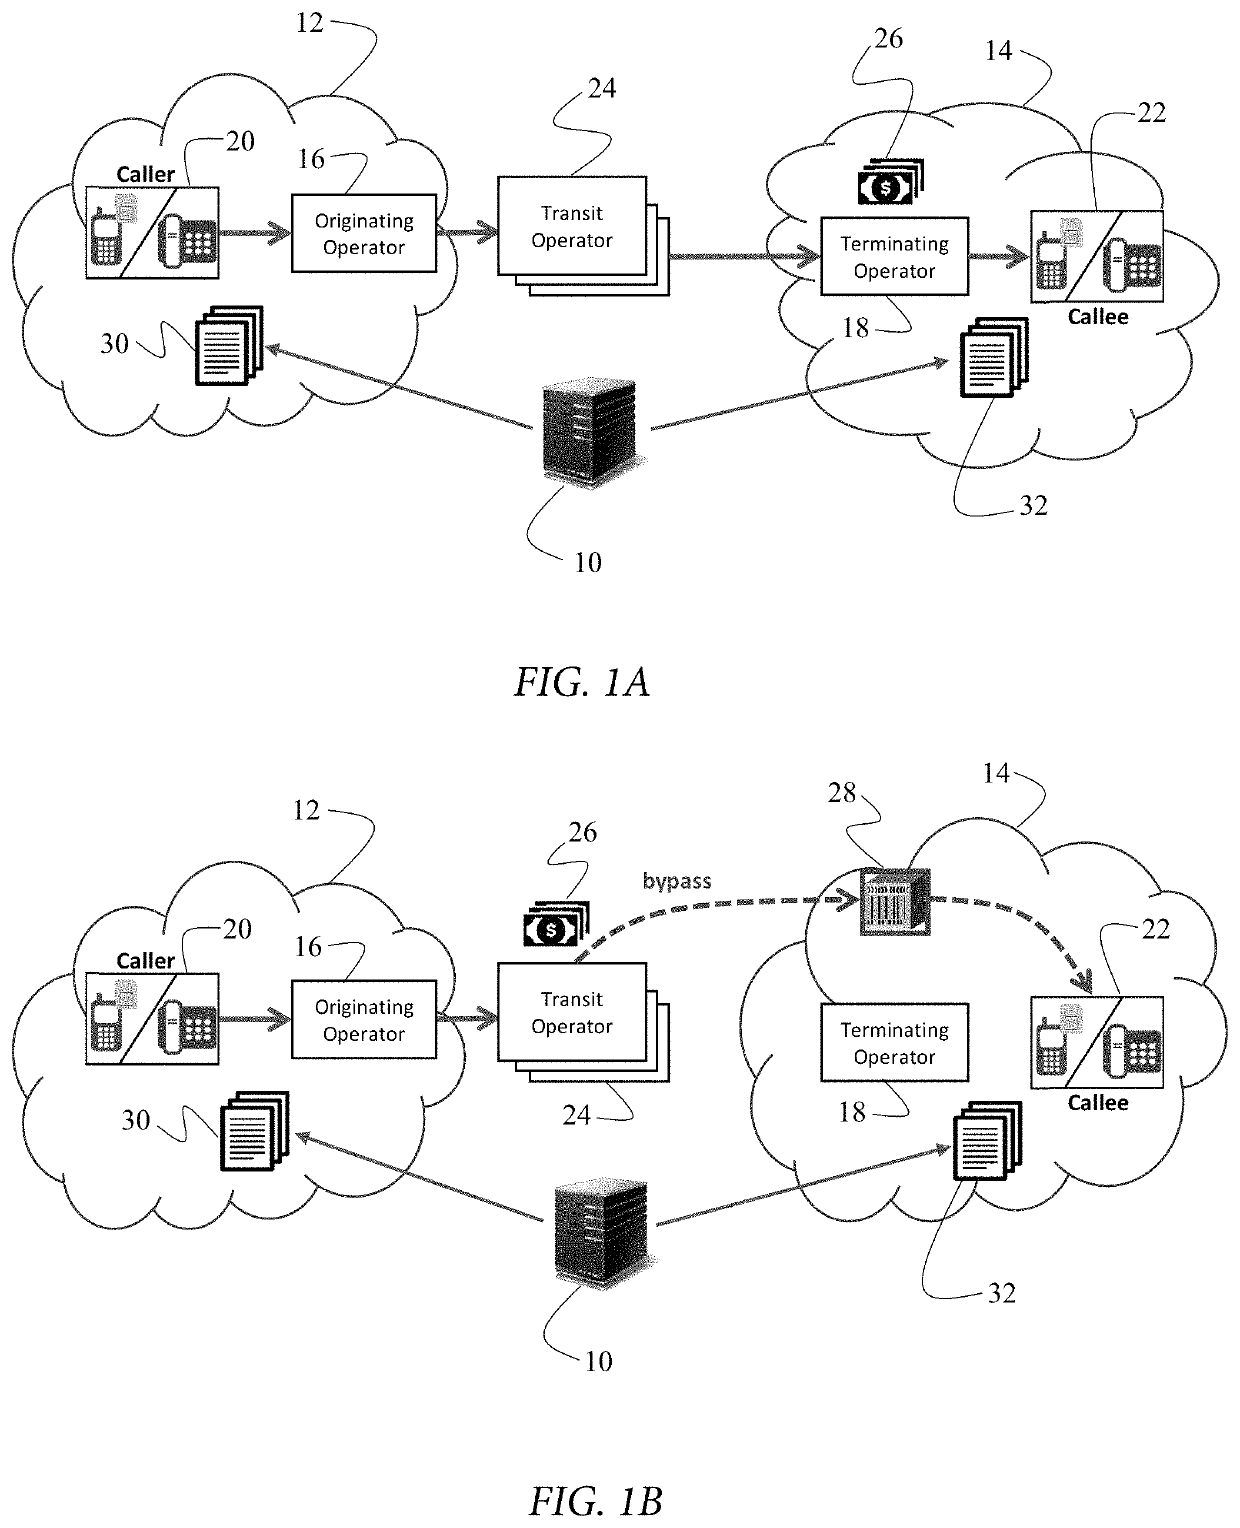 Method of identifying instances of international call interconnect bypass telecommunications fraud